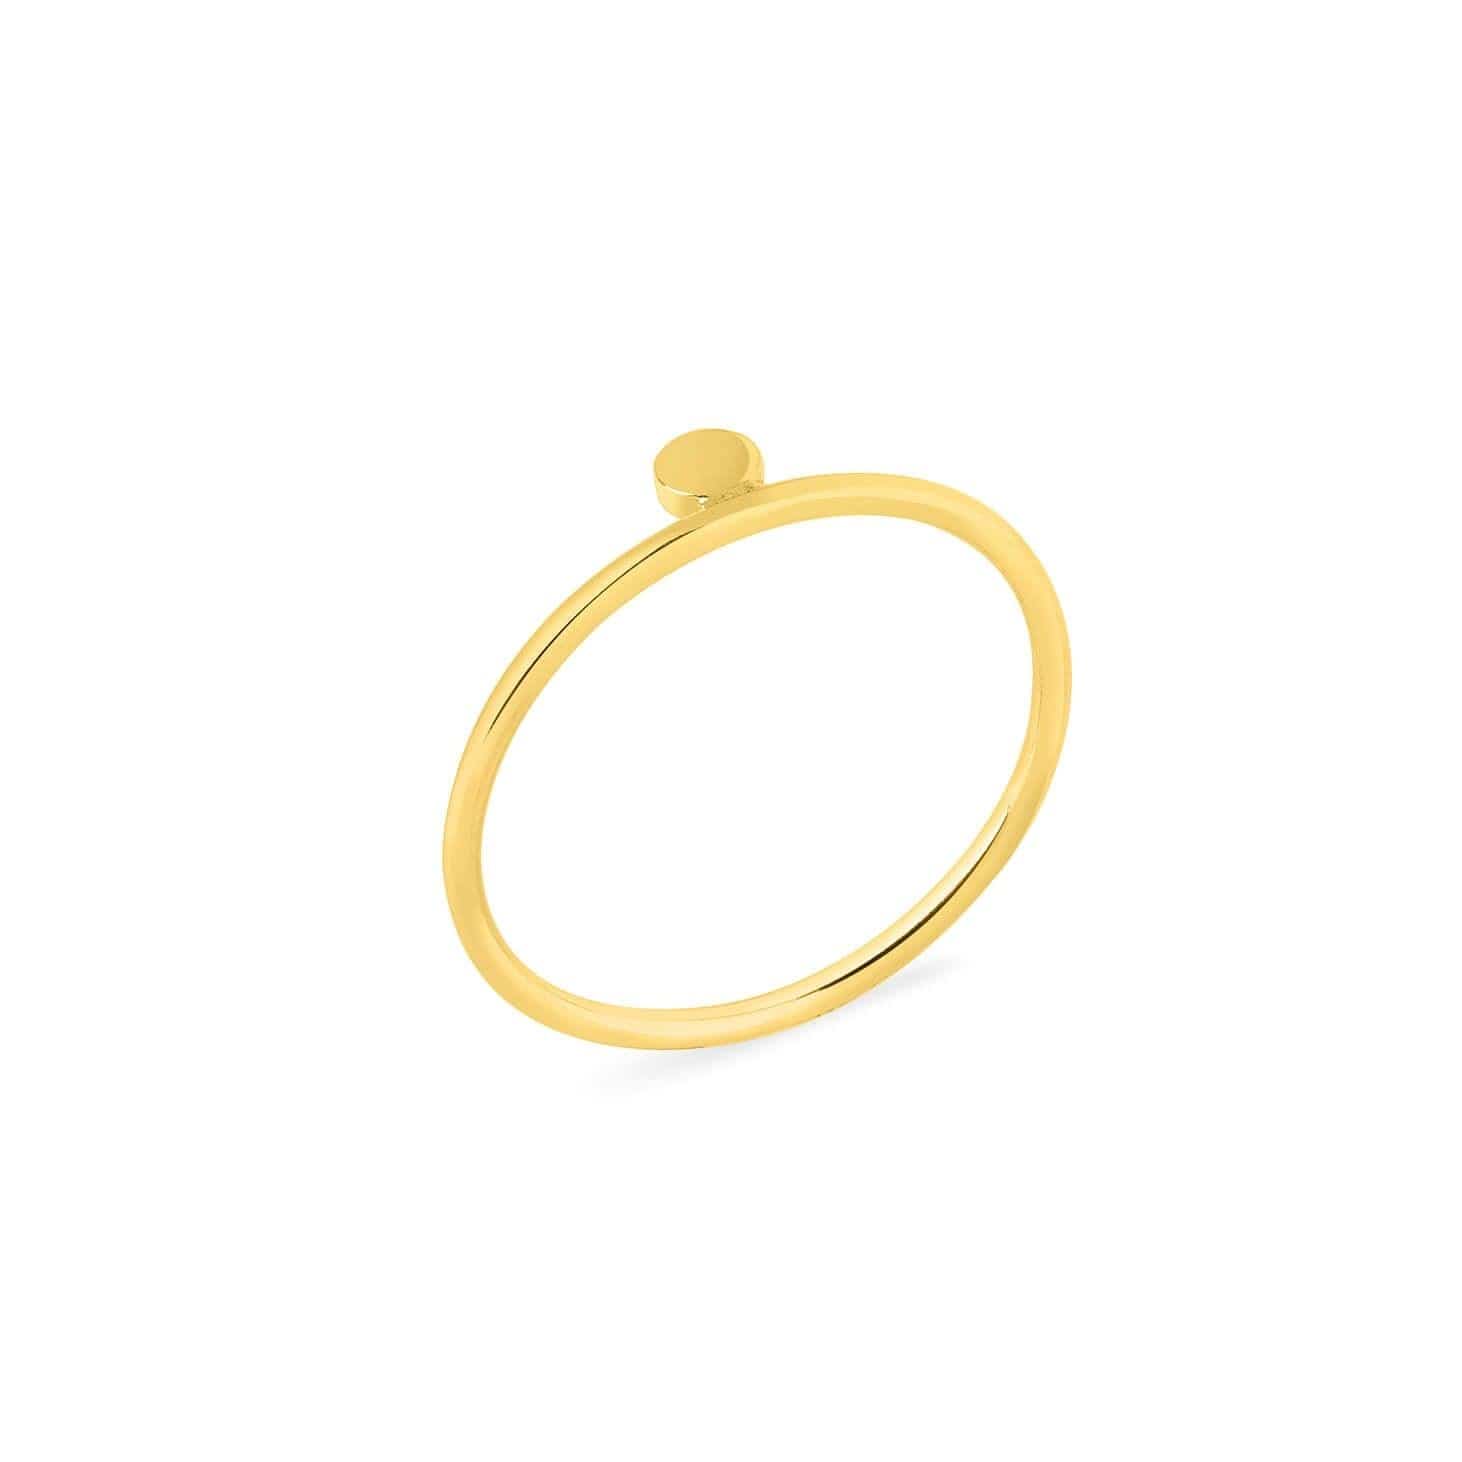 Gold Filled 4mm Bezel Stacking Ring, SIZE 6 – Beaducation